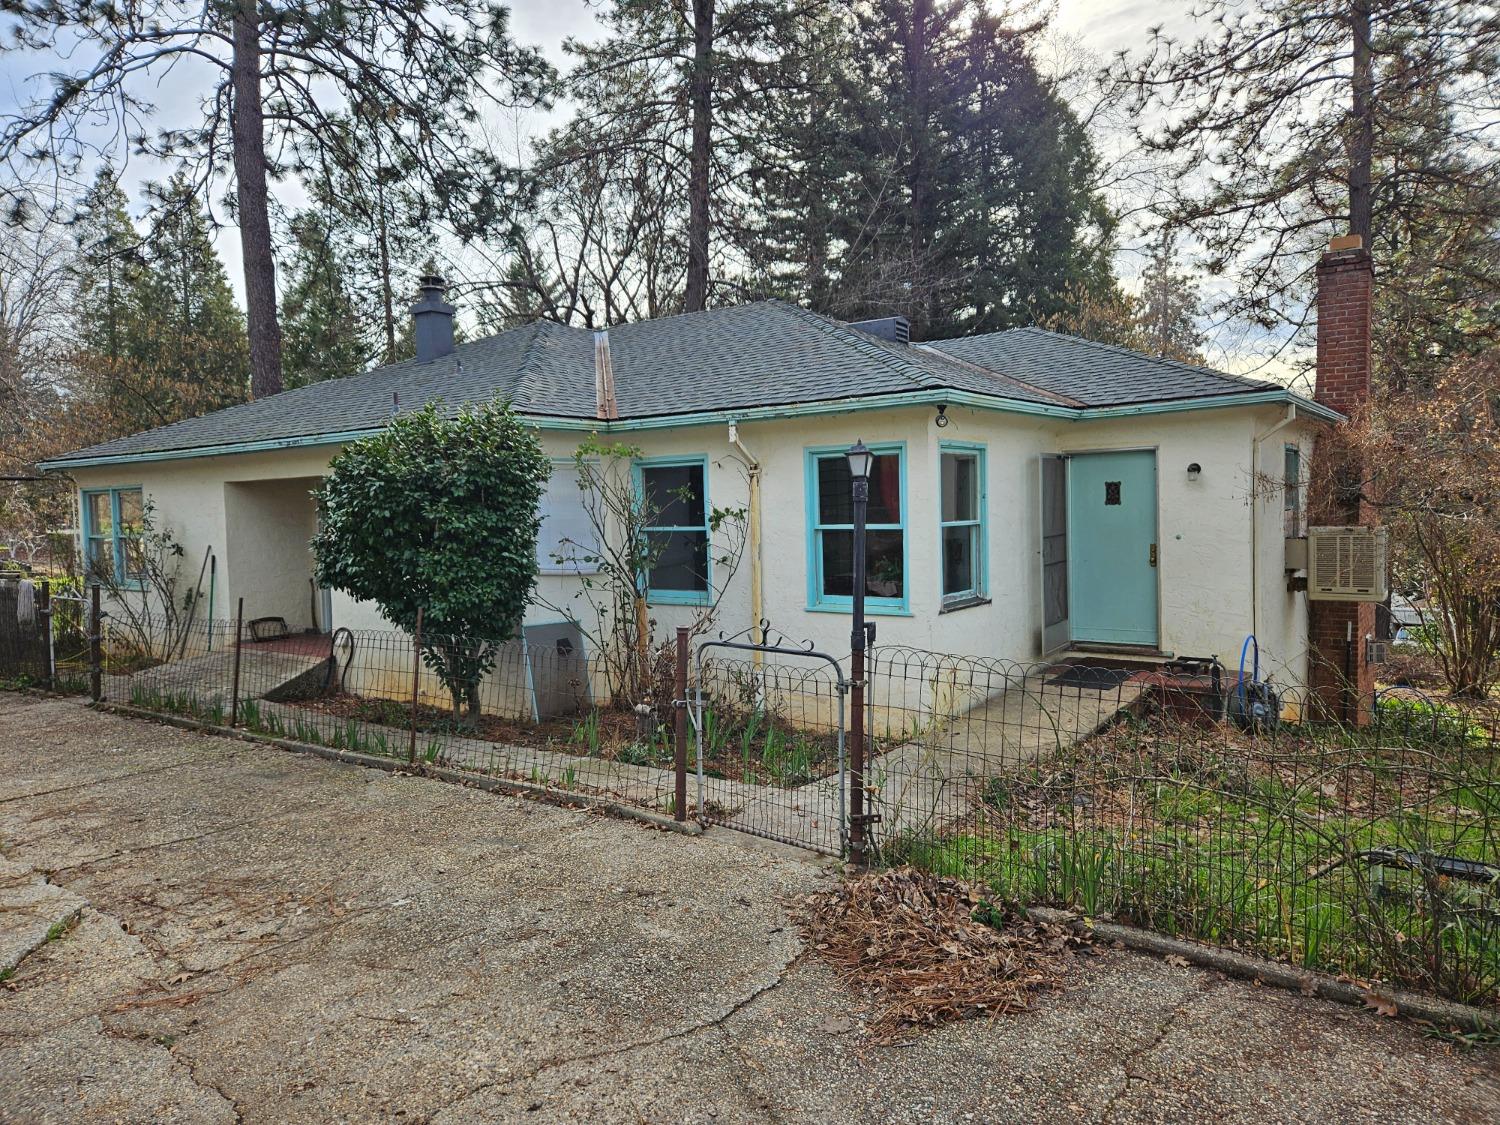 Photo of 10073 Westhill Rd in Grass Valley, CA